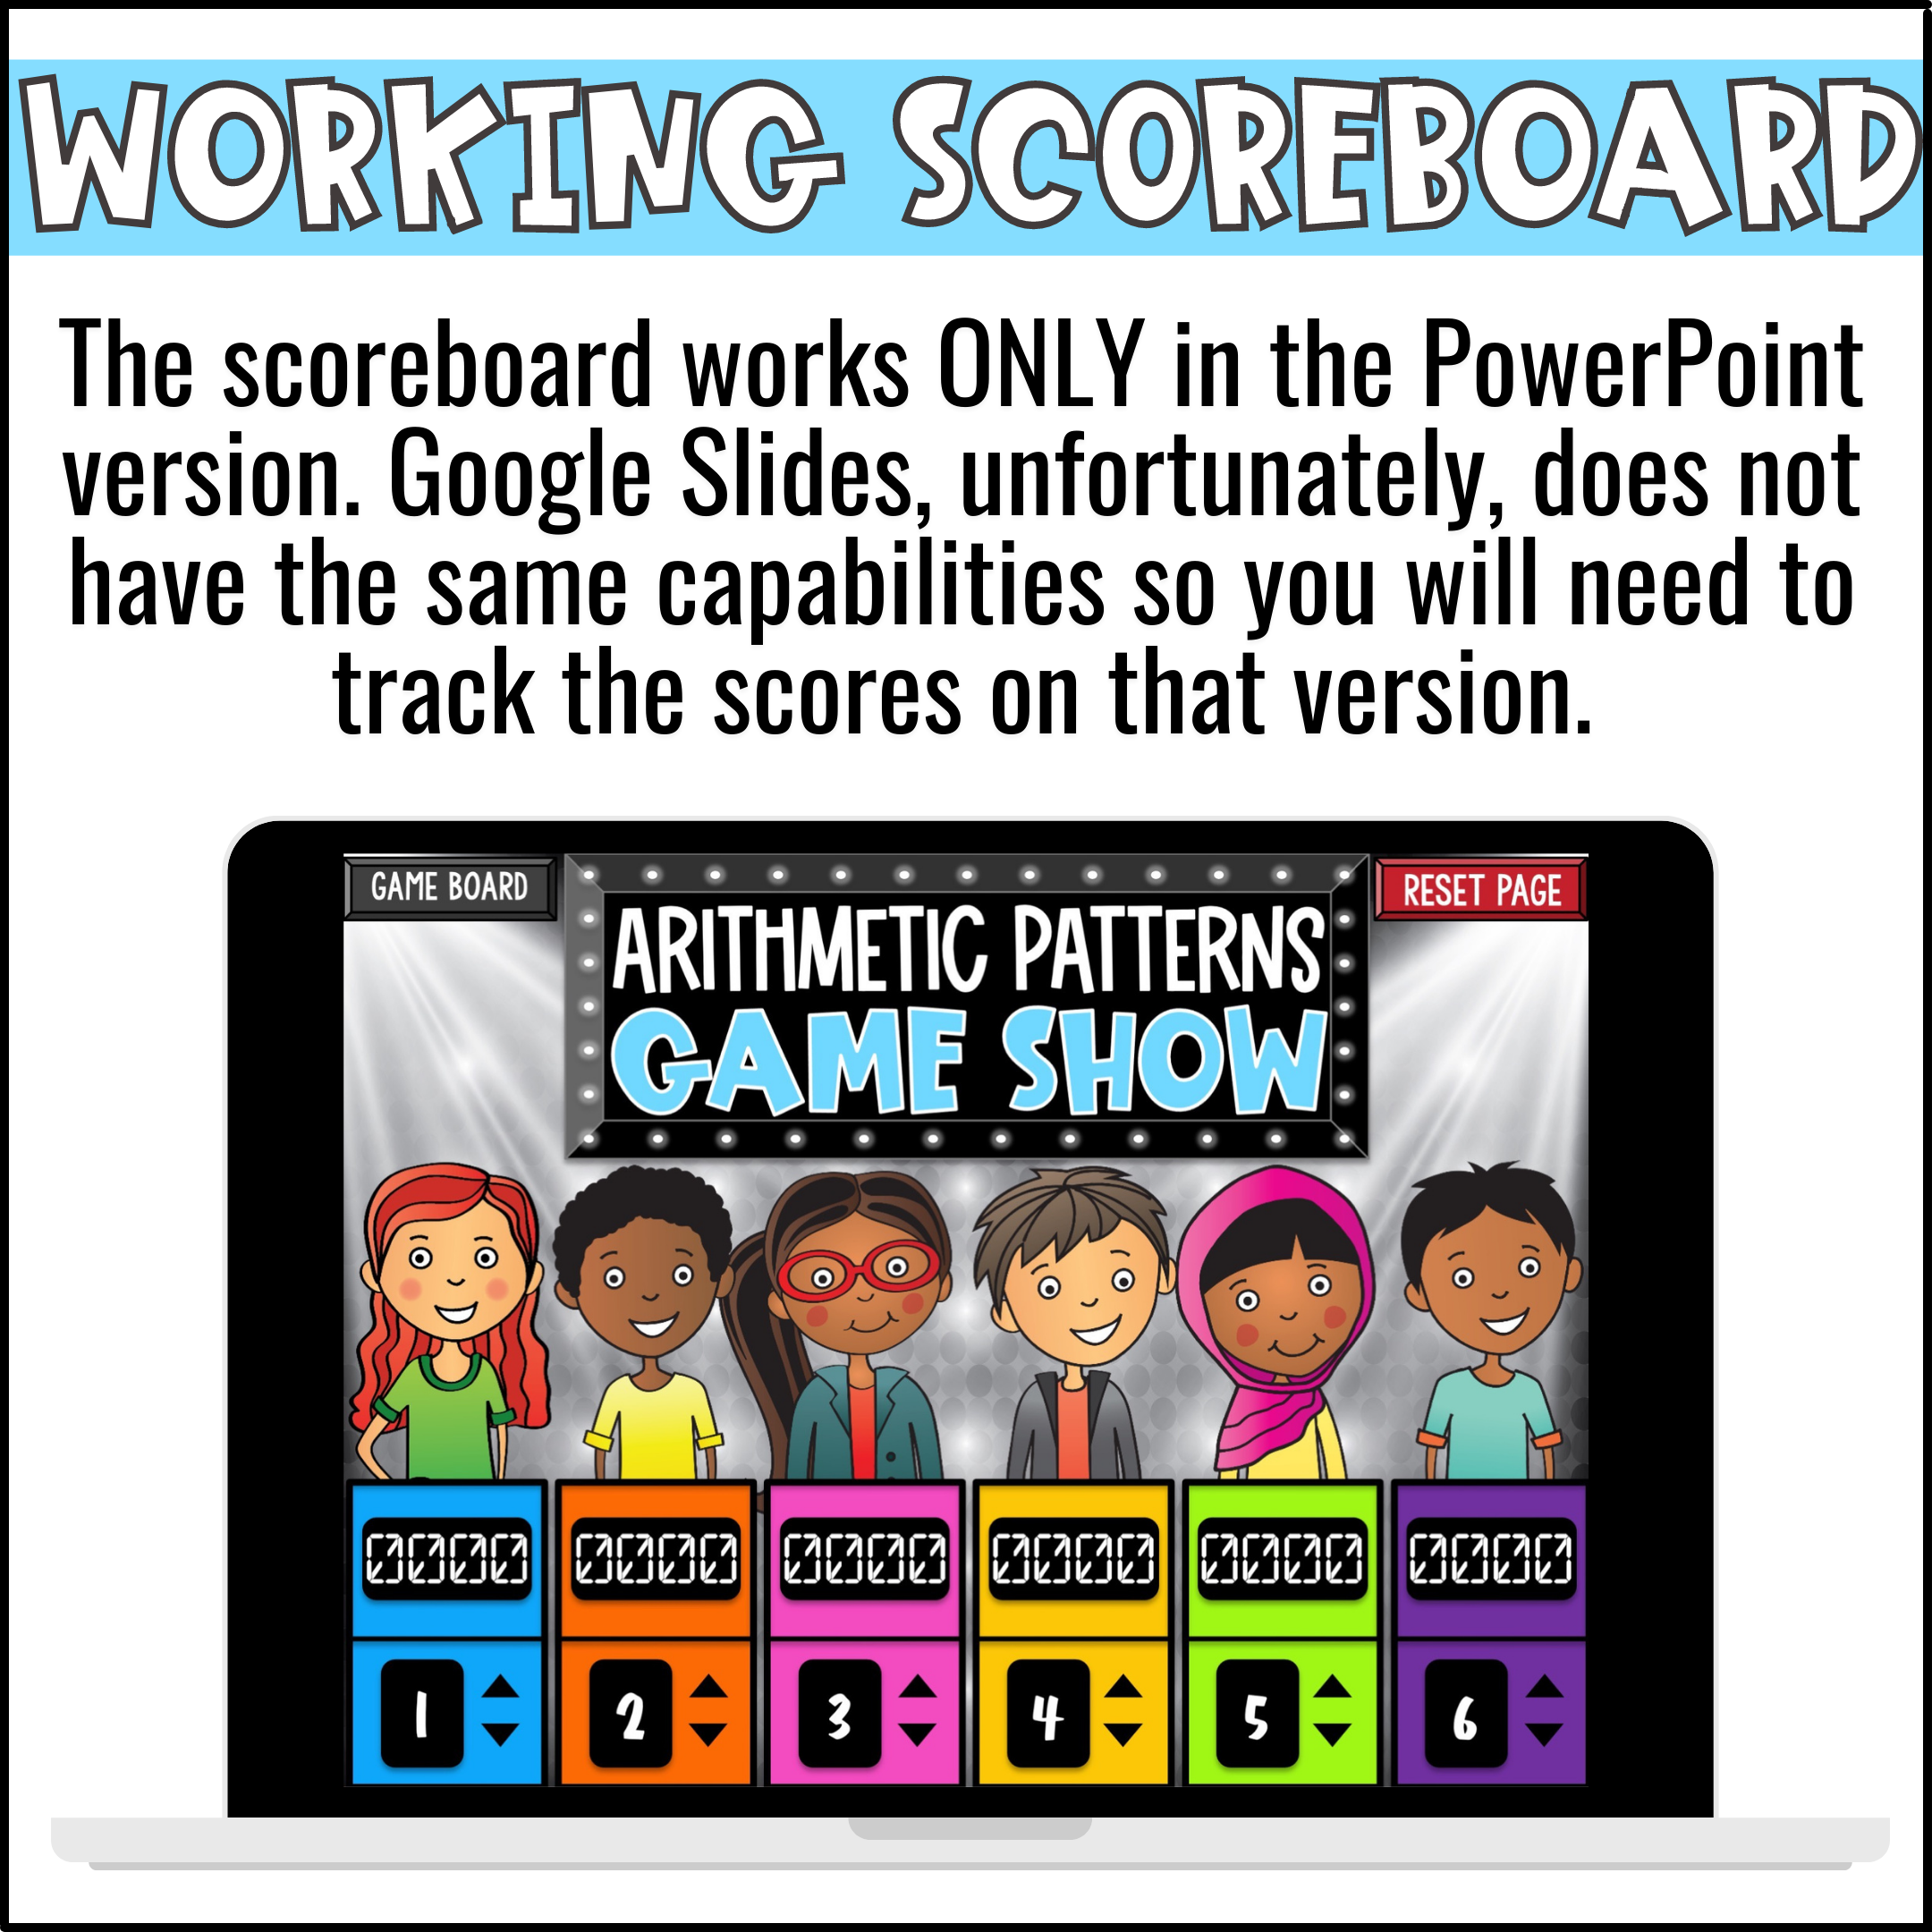 Arithmetic Patterns Game Show (2)